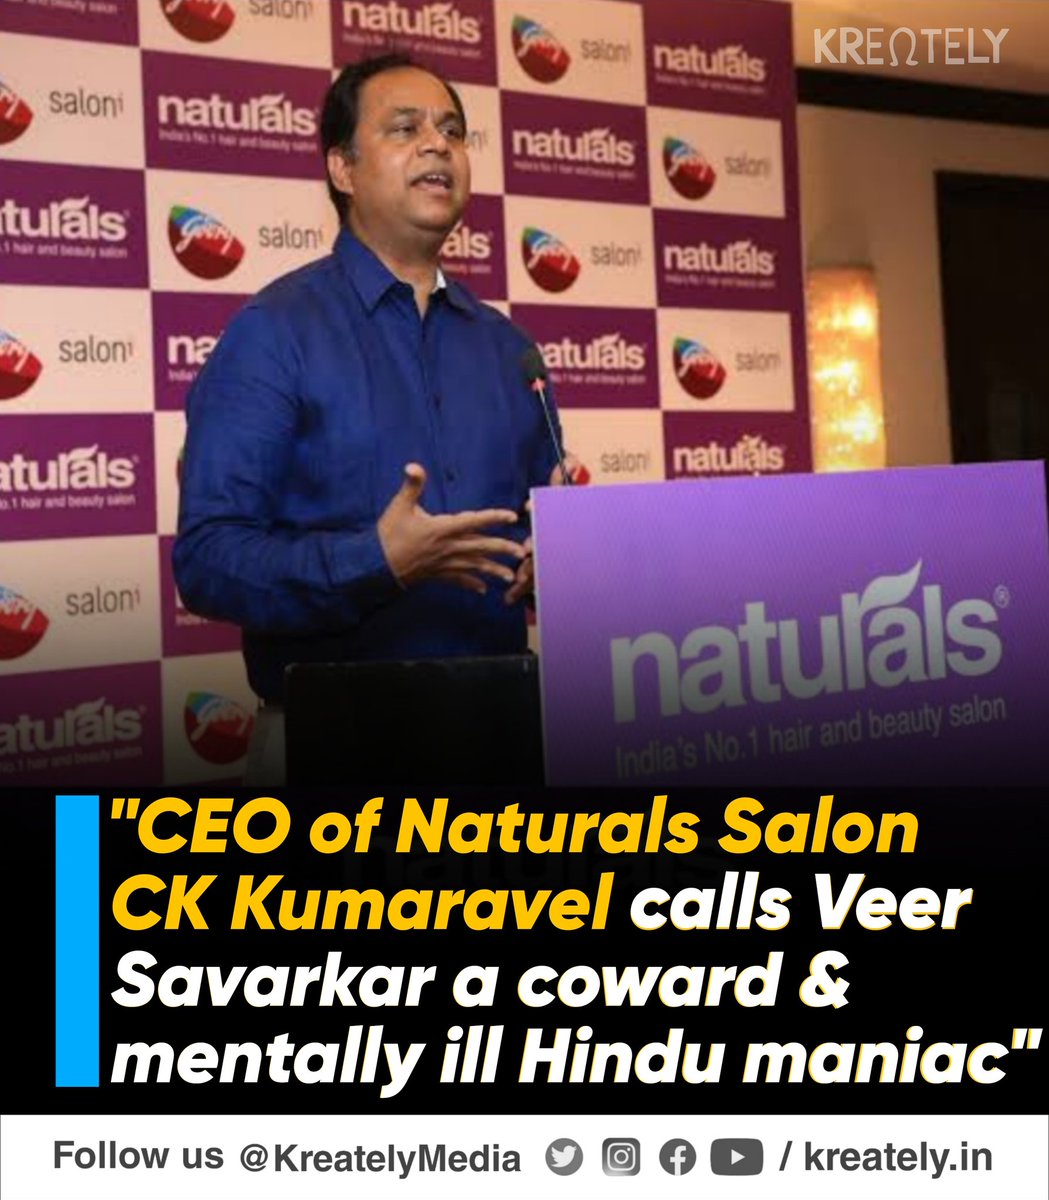 Dear Indian Citizens Anti National @ckknaturals insulted great Indian freedom fighter Veer Damodhar Savarkar ji. We request All Indians citizen to #BoycottNaturals There is no pardon for those who commit acts of treason. Buying their product is an insult to the country